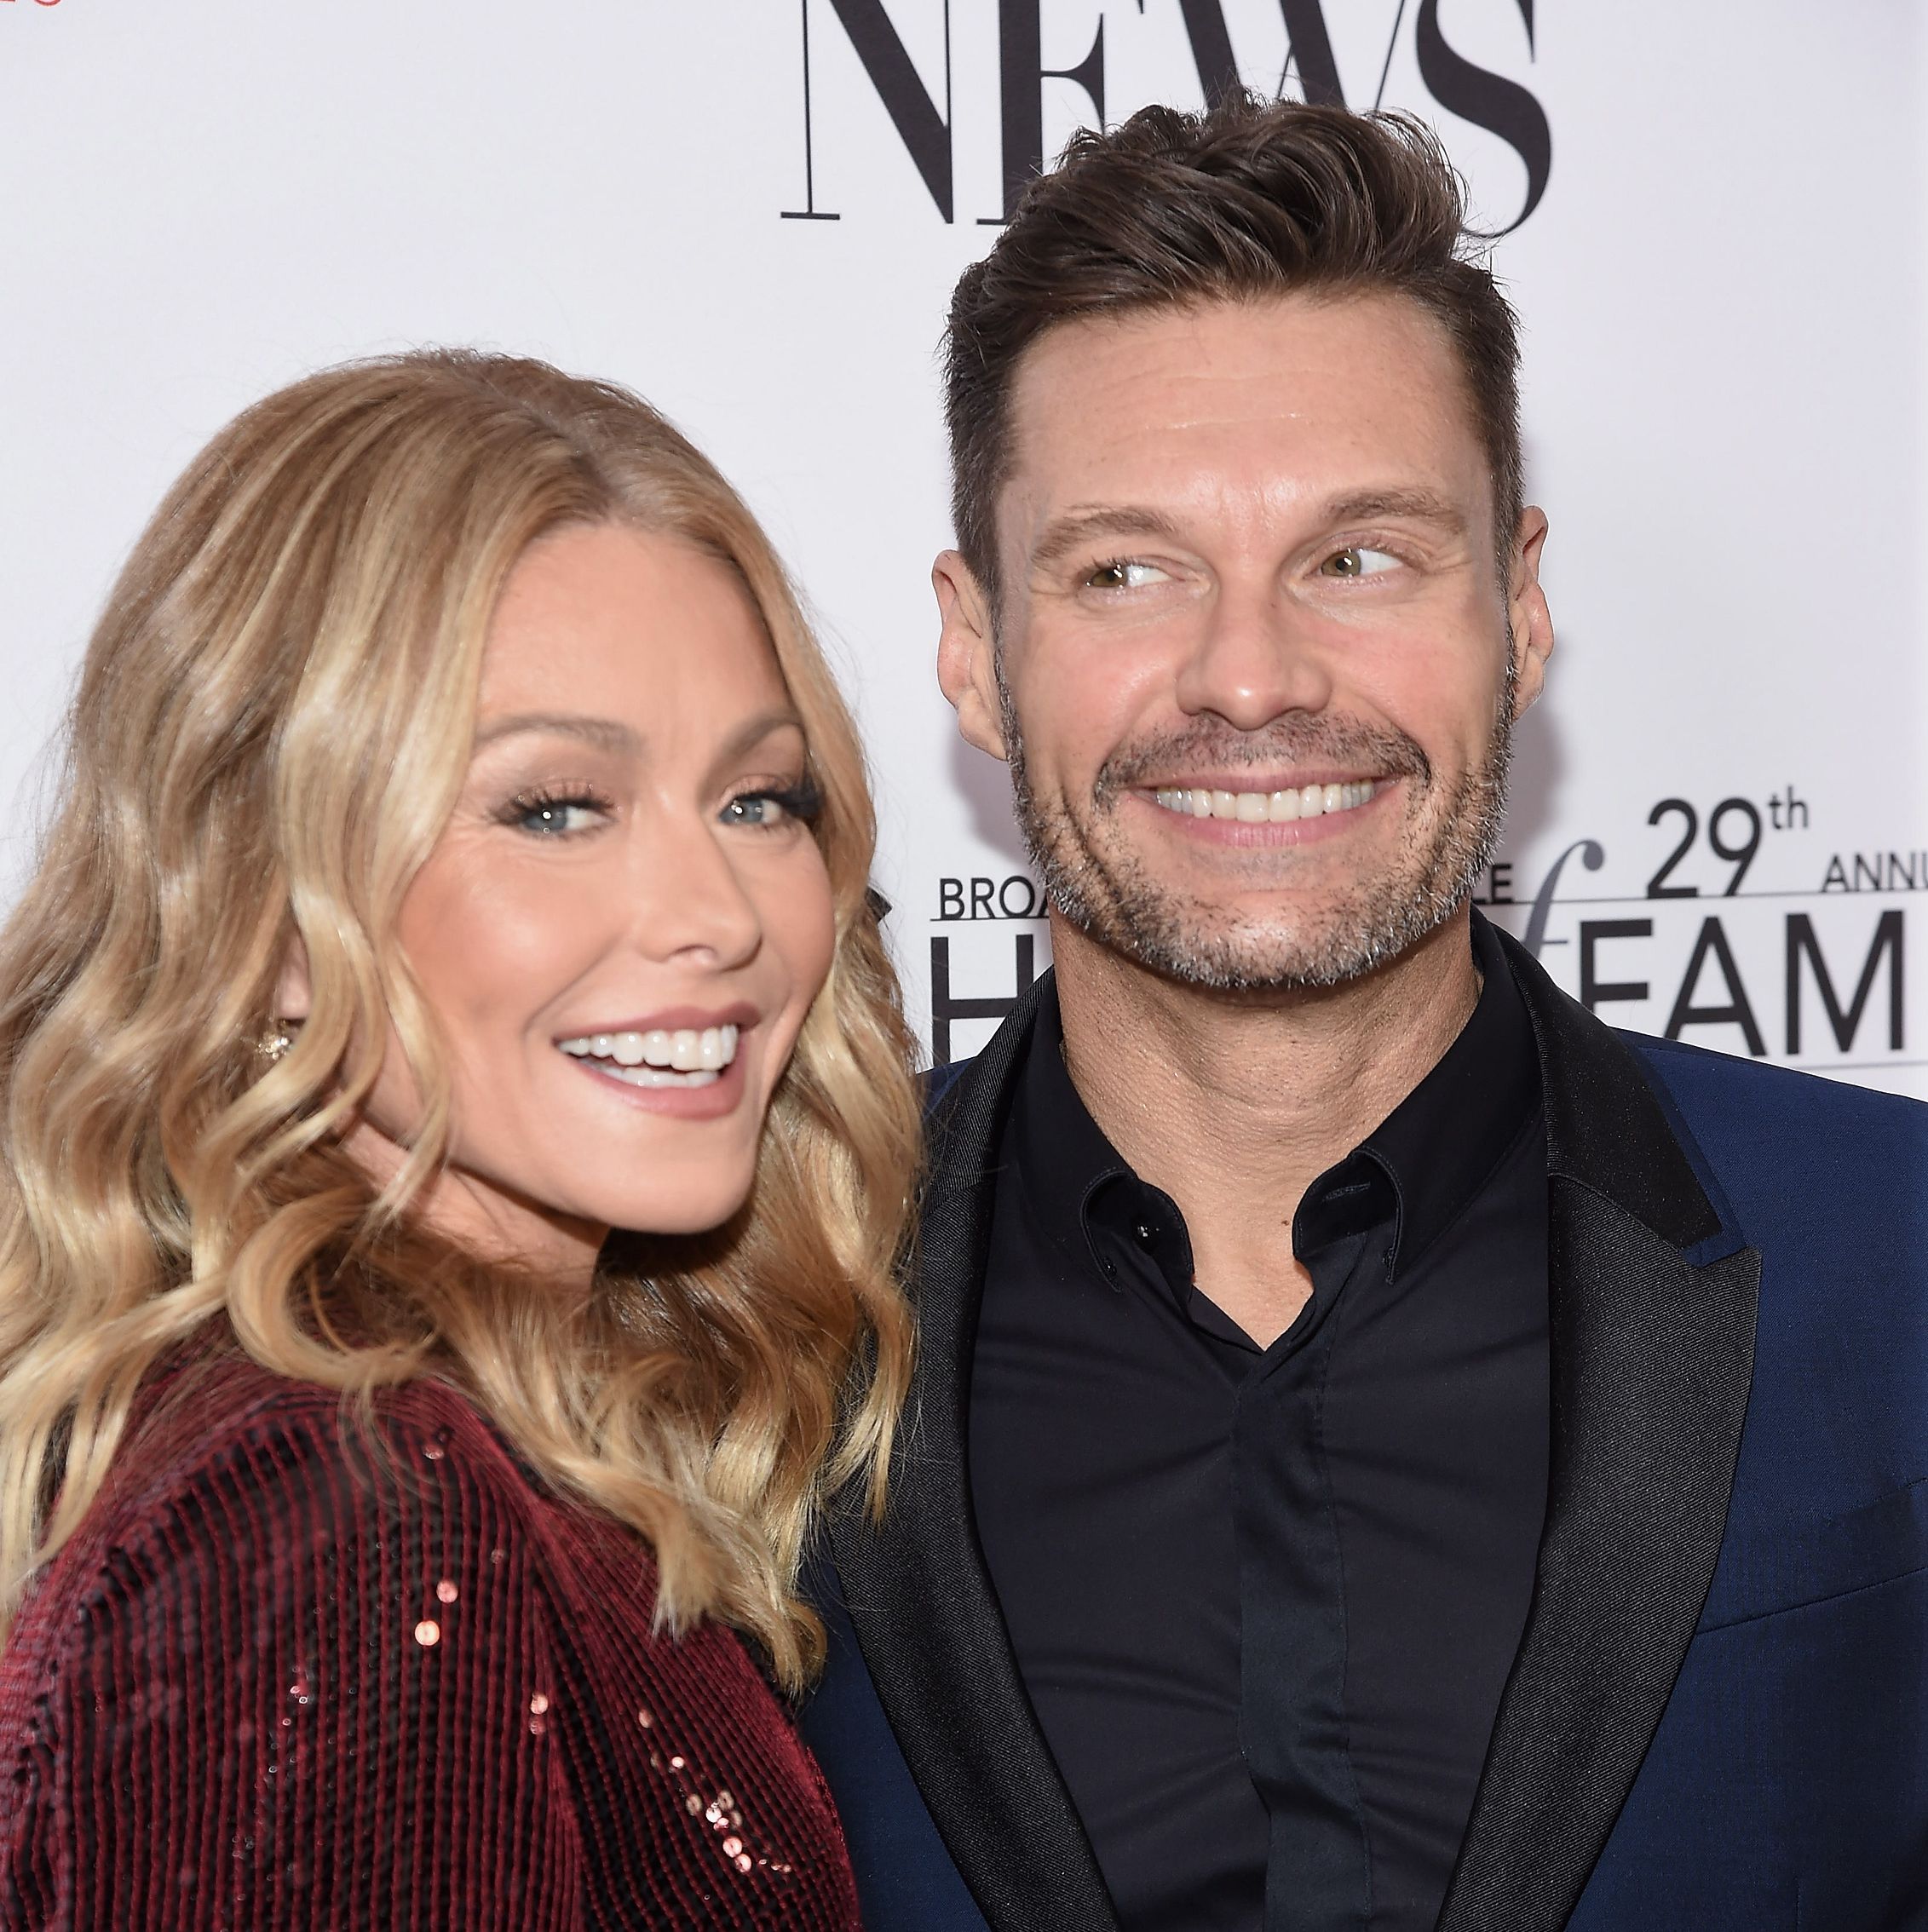 Kelly Ripa Gets Real About Her Relationship With 'Live' Cohost Ryan Seacrest